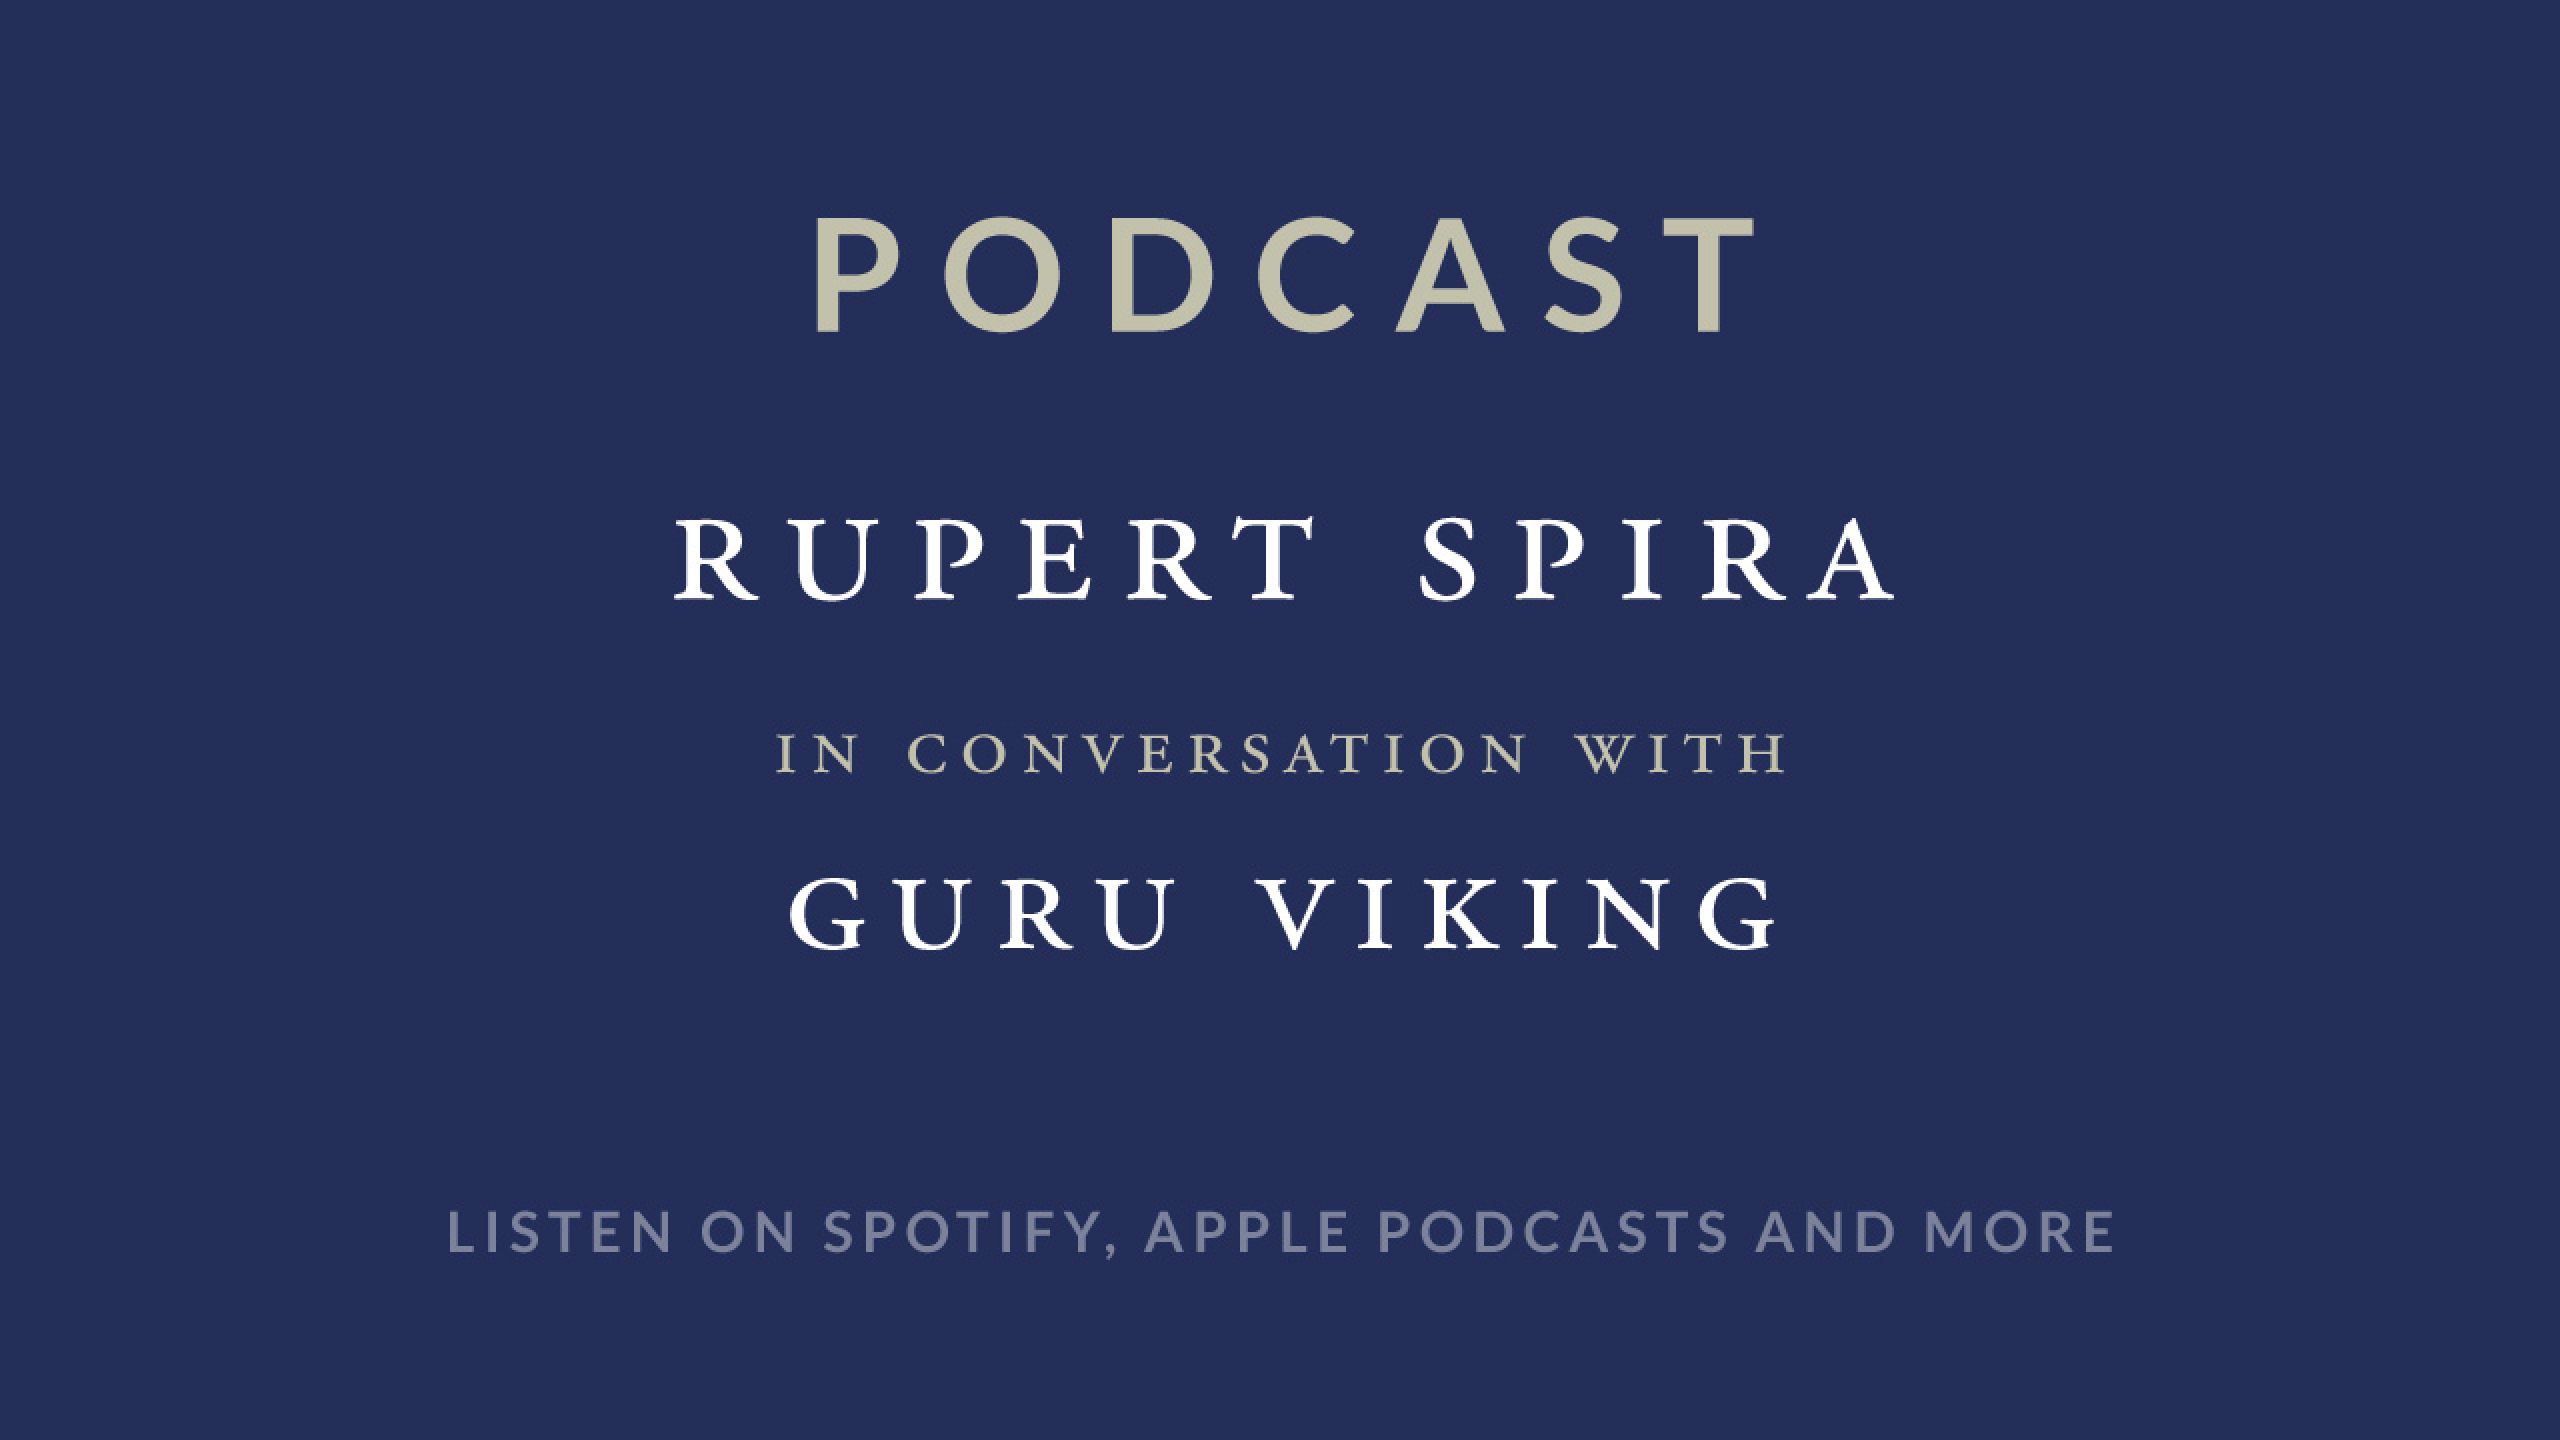 Rupert Talks About His Life and Spiritual Journey with Guru Viking